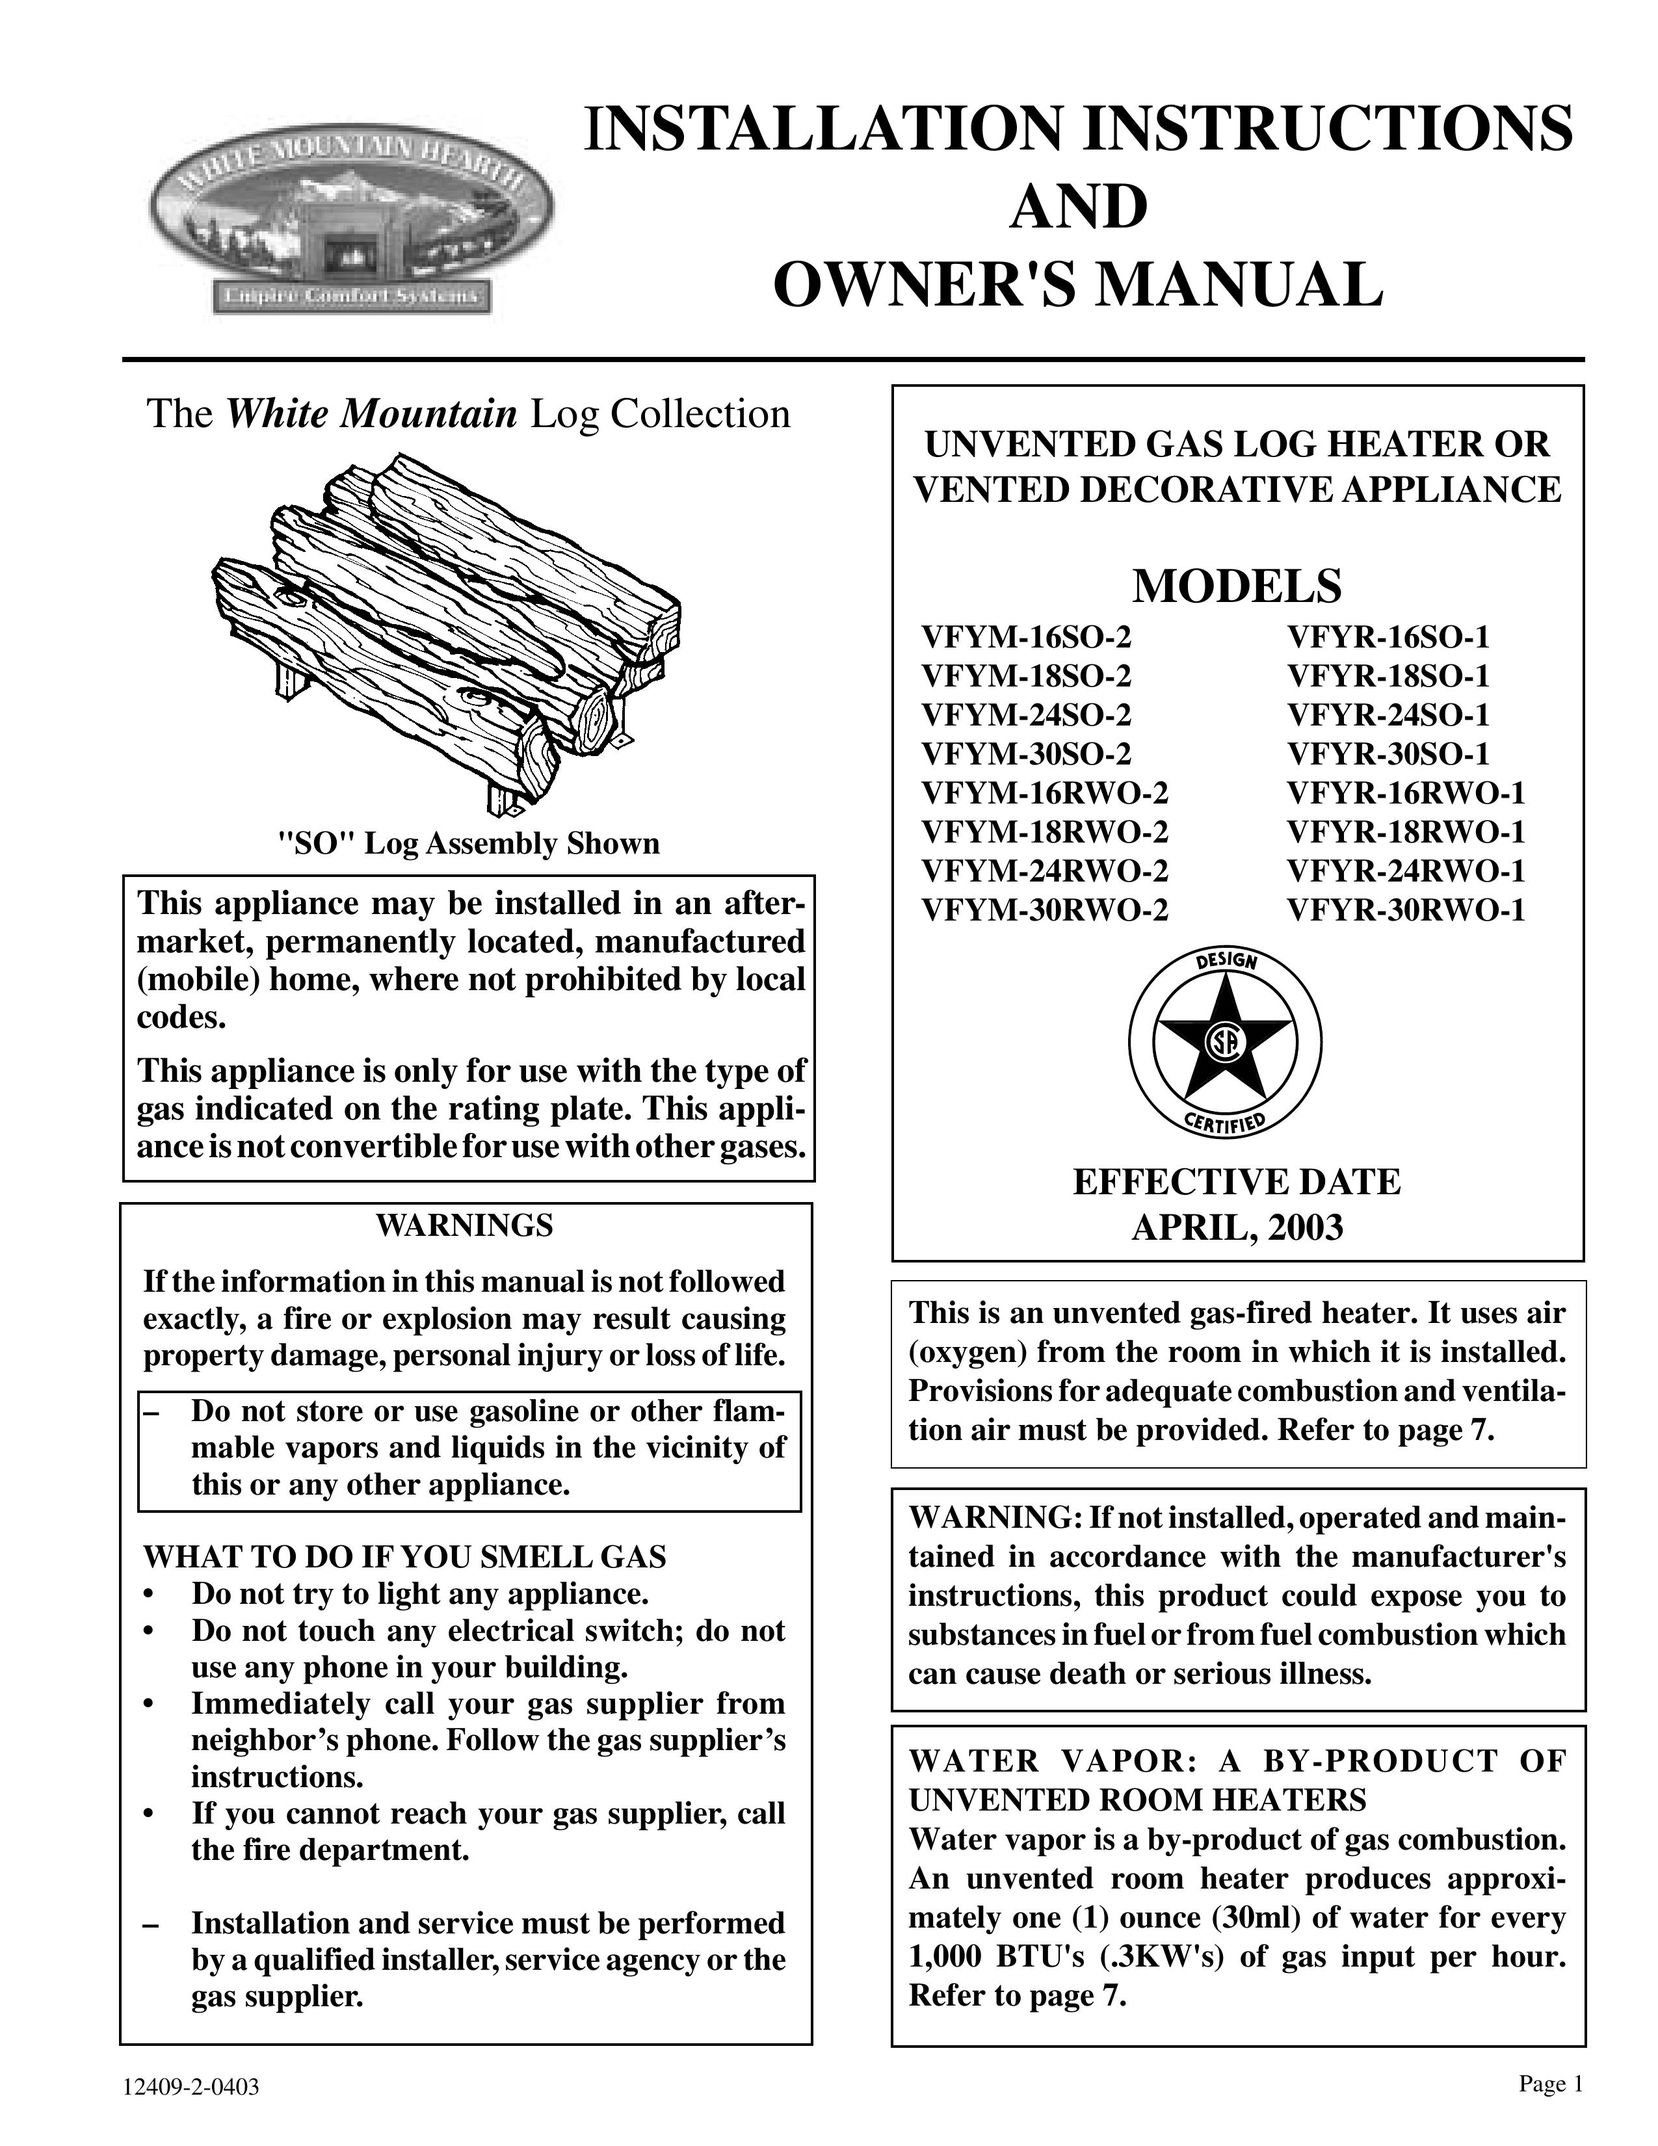 Empire Comfort Systems VFYR-24SO-1 Water Heater User Manual